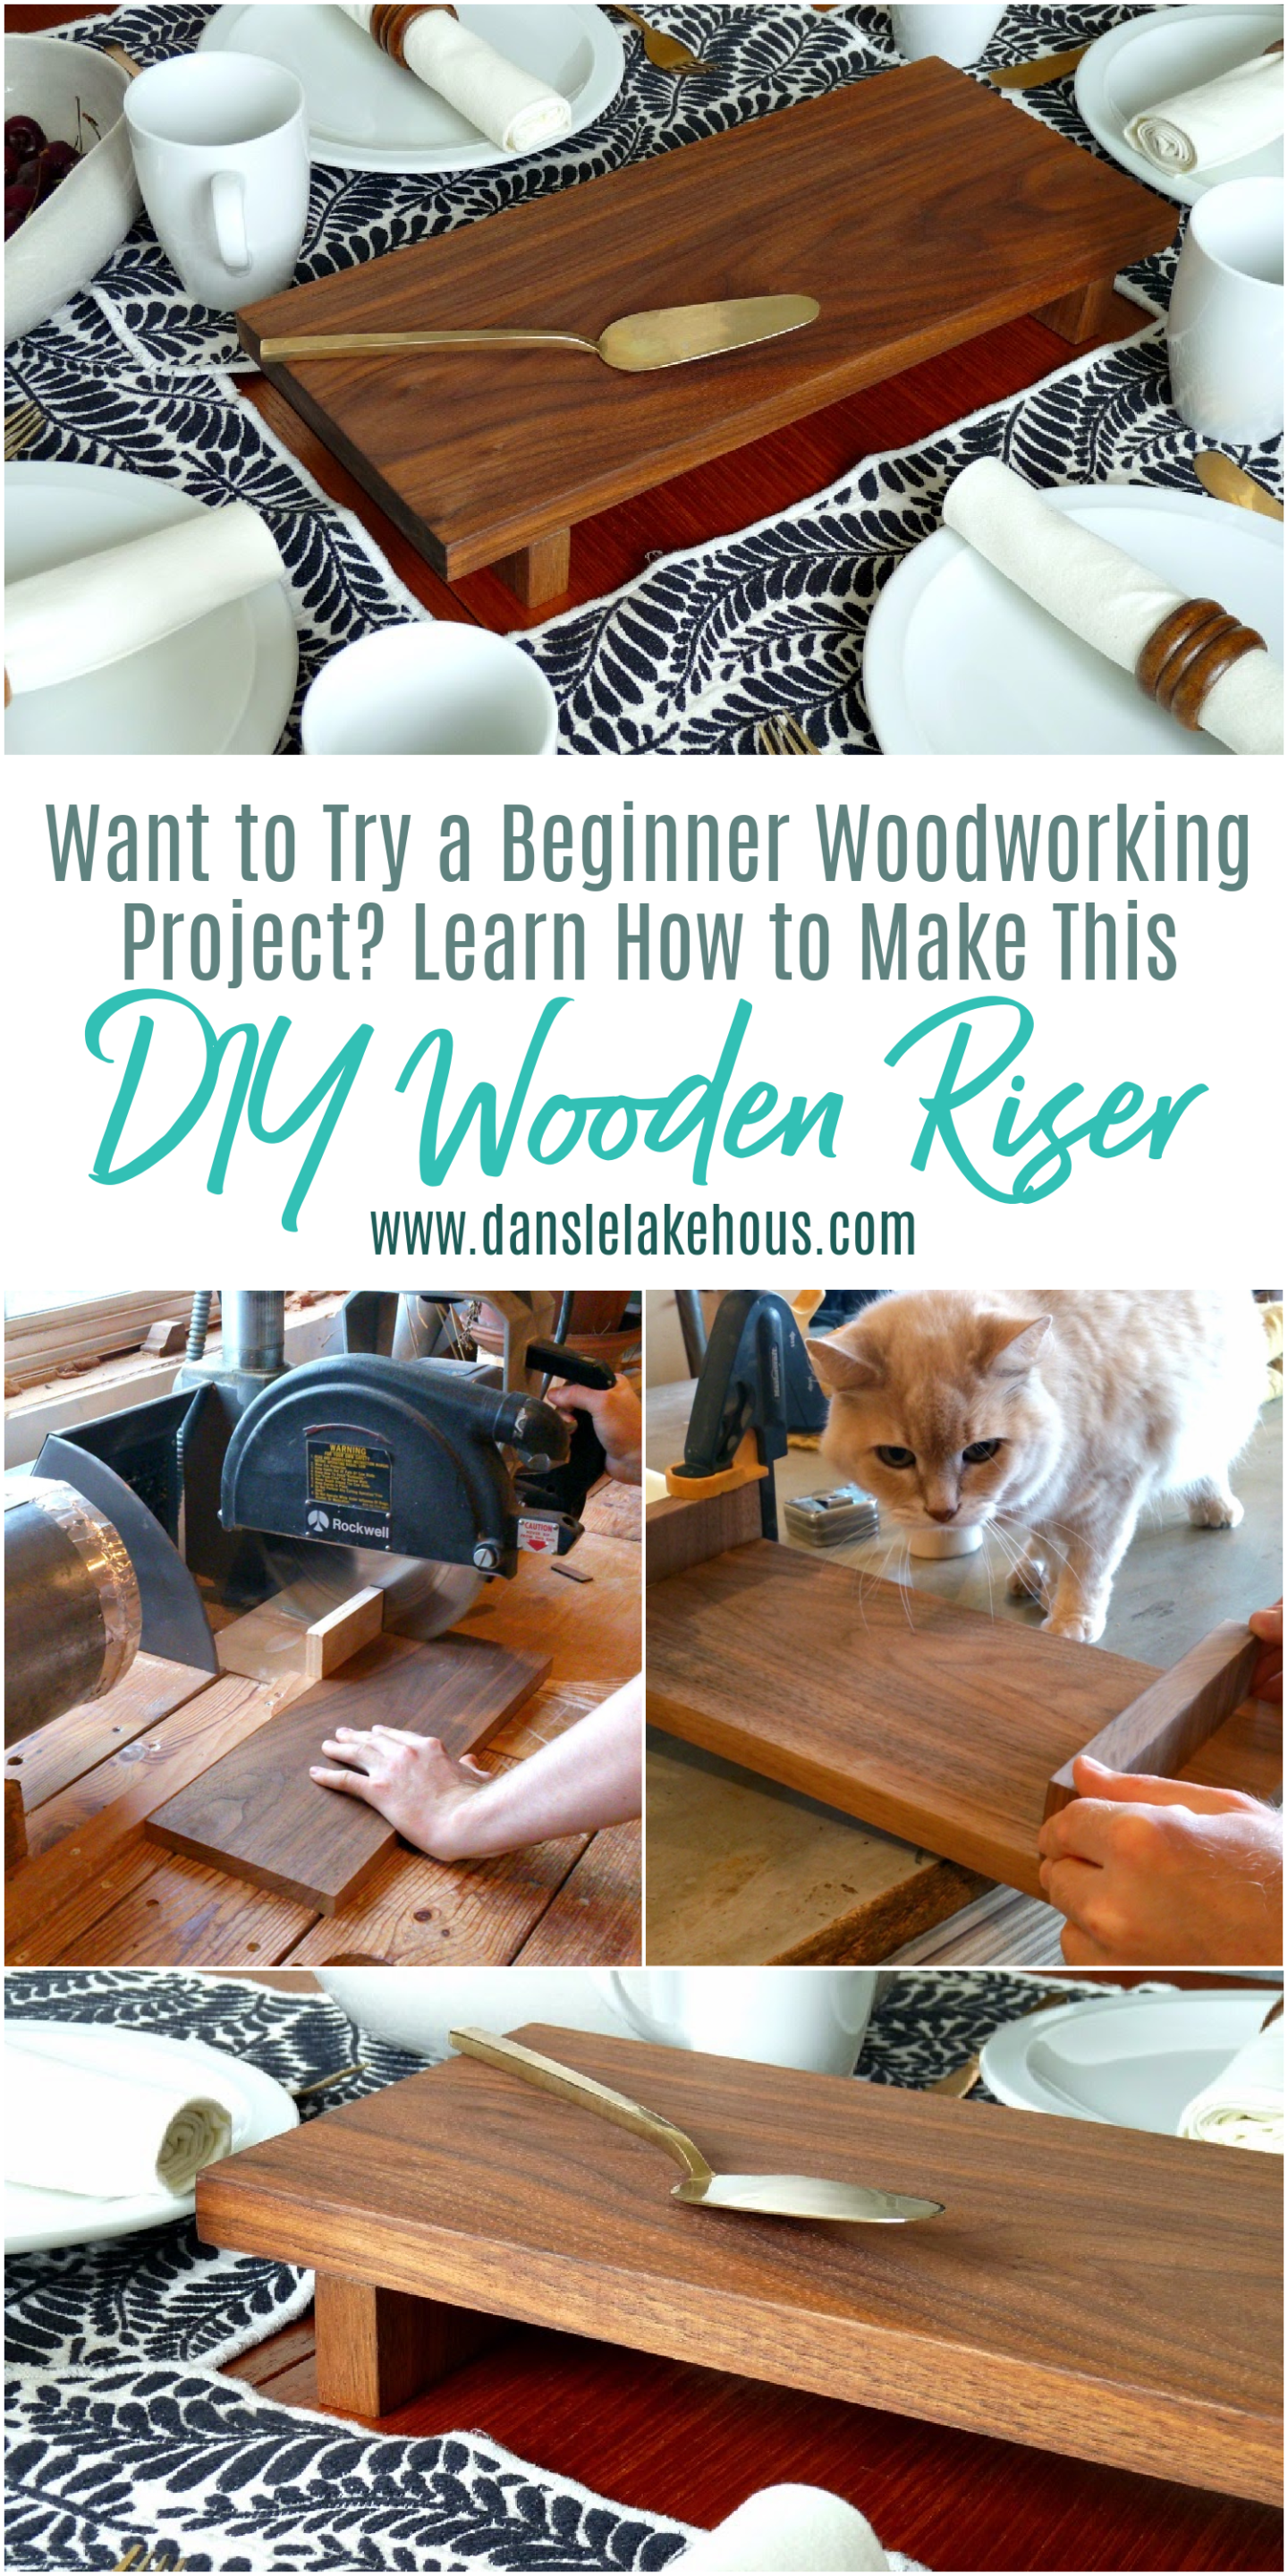 How to Make a DIY Wooden Riser